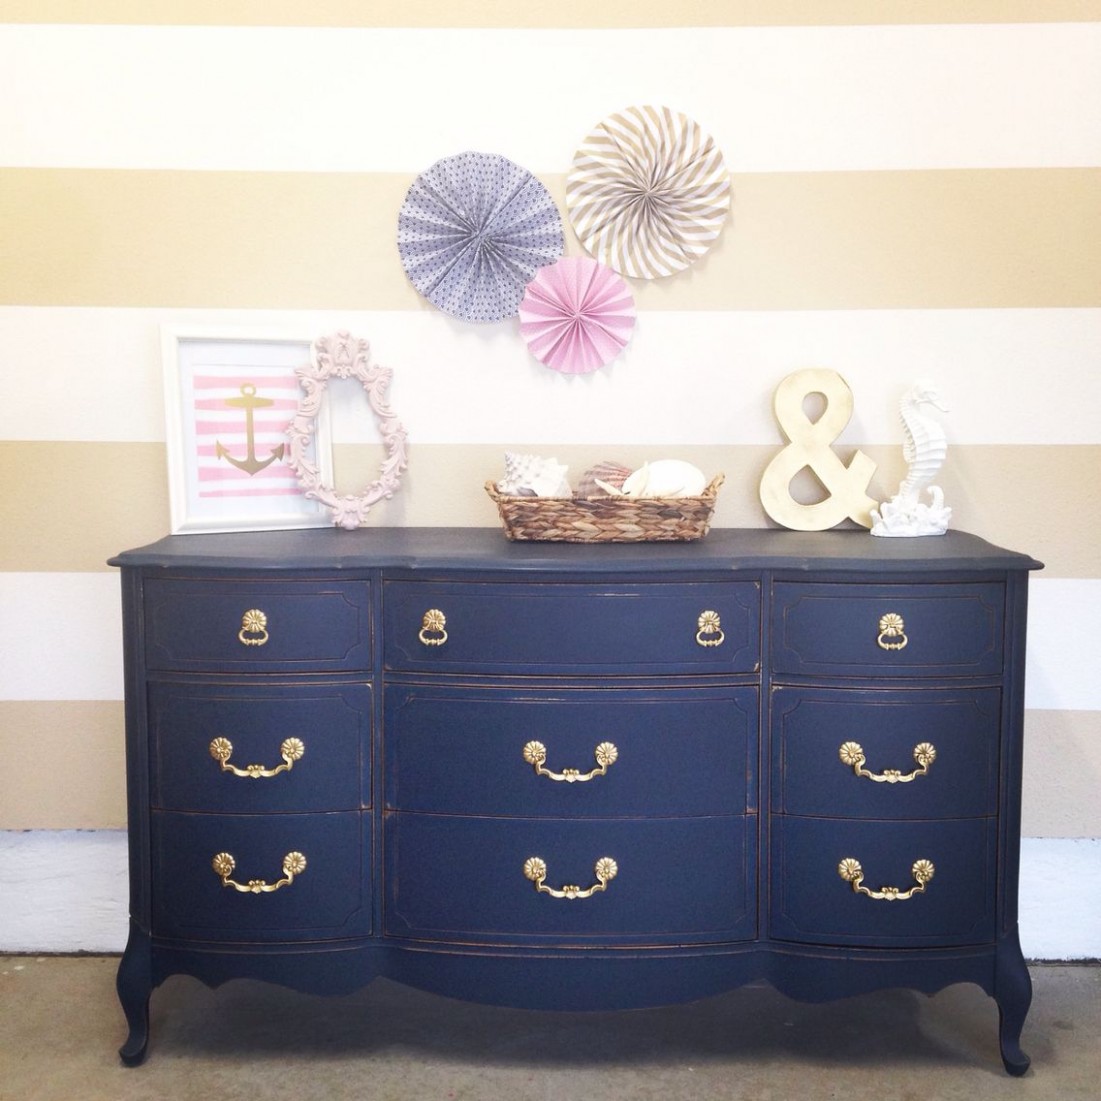 Custom Mix Of Annie Sloan Chalkpaint To Get This Navy Blue Color ..